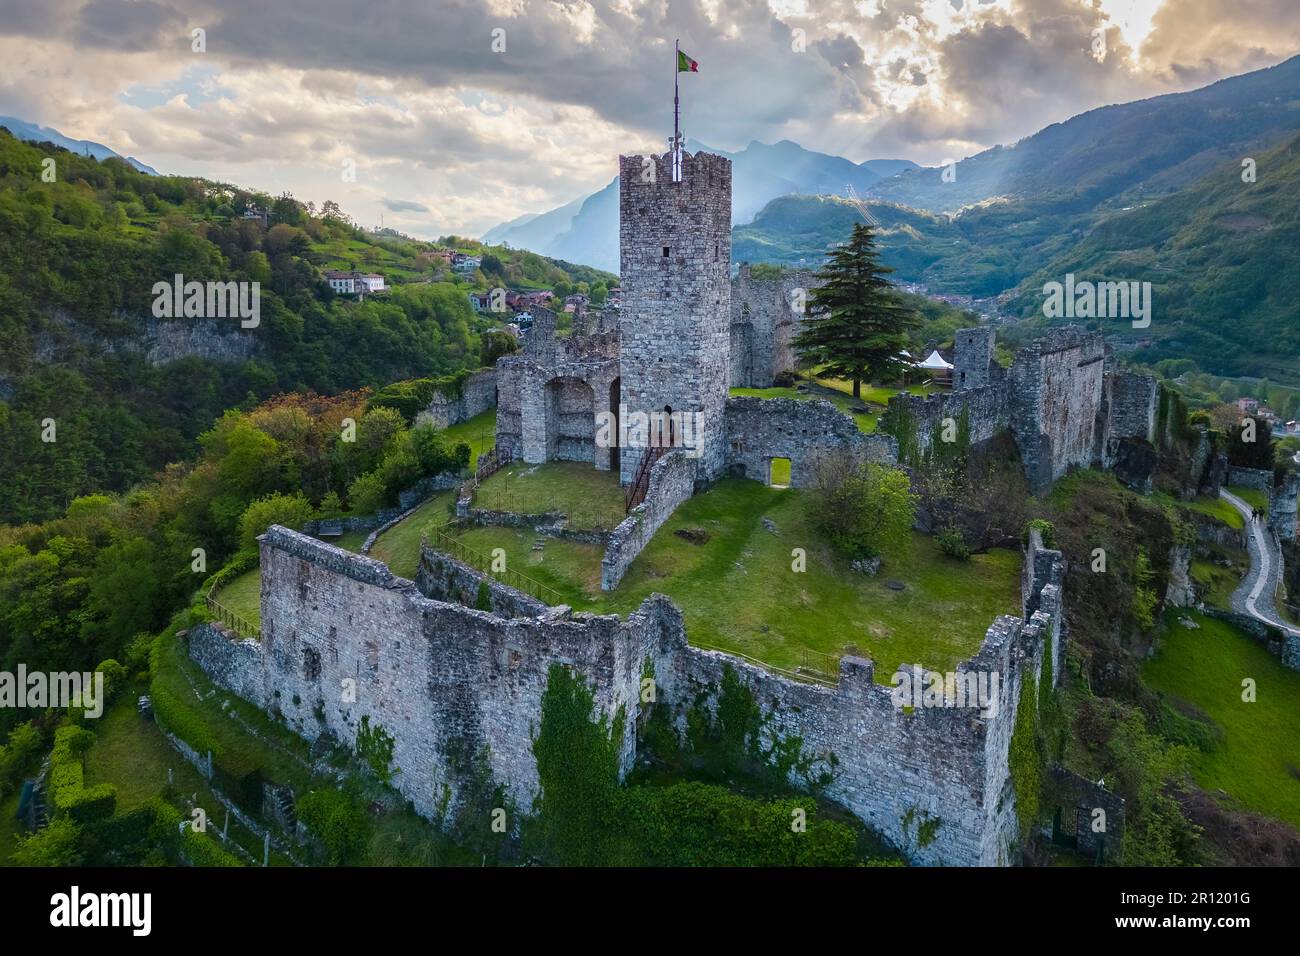 Aerial view of the ancient ruins of the castle of Breno. Brescia province, Valcamonica valley, Lombardy, Italy, Europe. Stock Photo